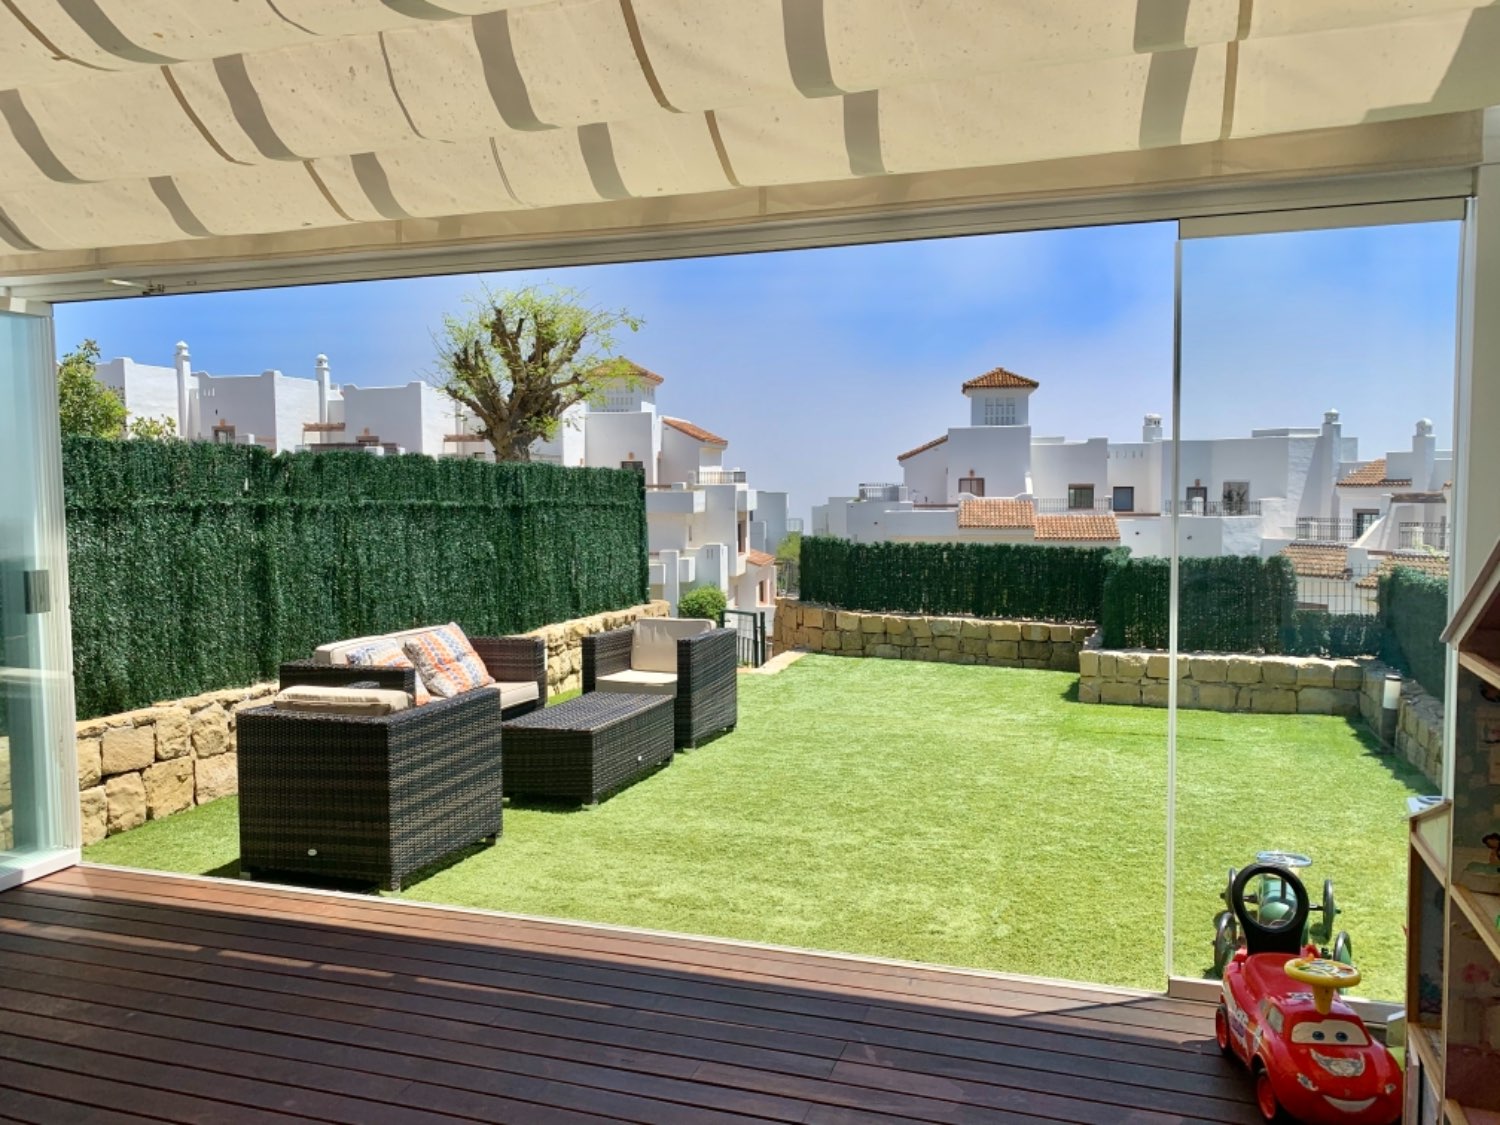 Beautiful four bedroom townhouse a few meters away from Alcaidesa beach and golf course